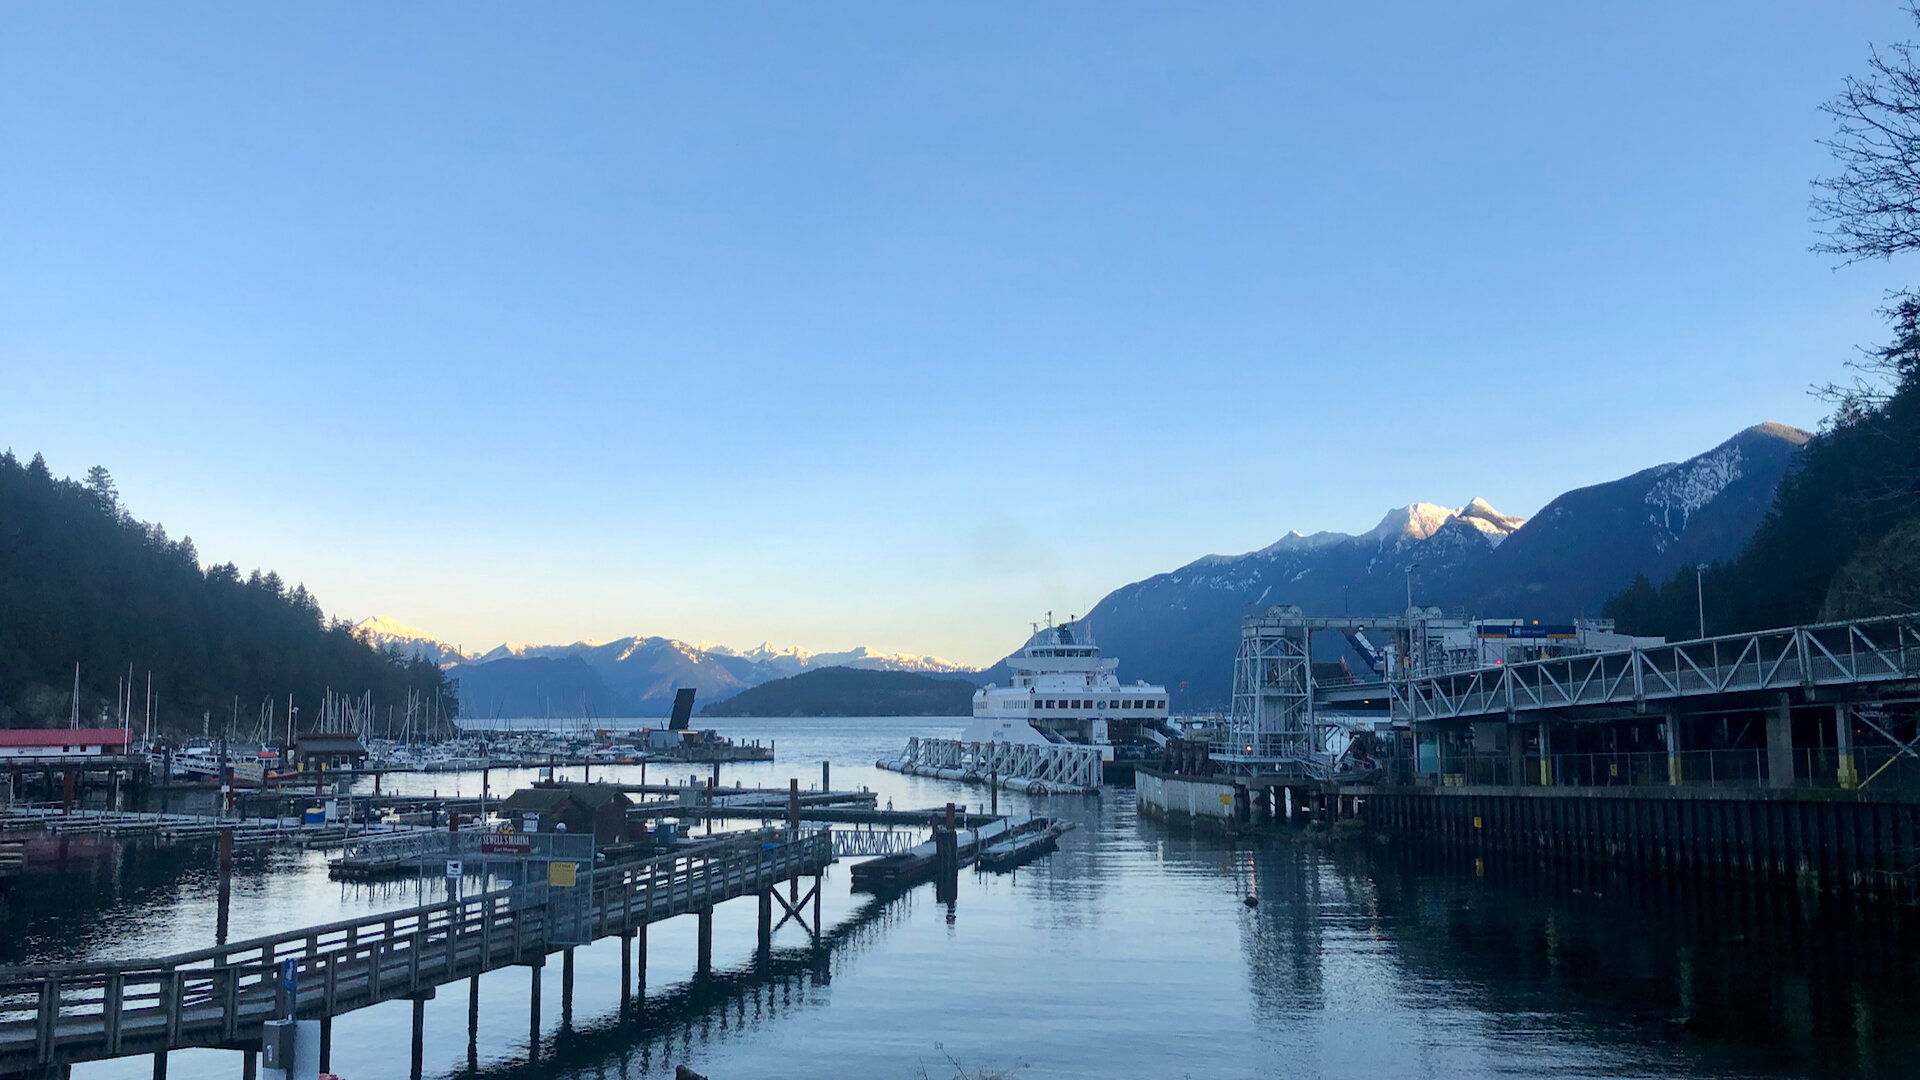  Waiting for the ferry early in the morning in Horseshoe Bay. 